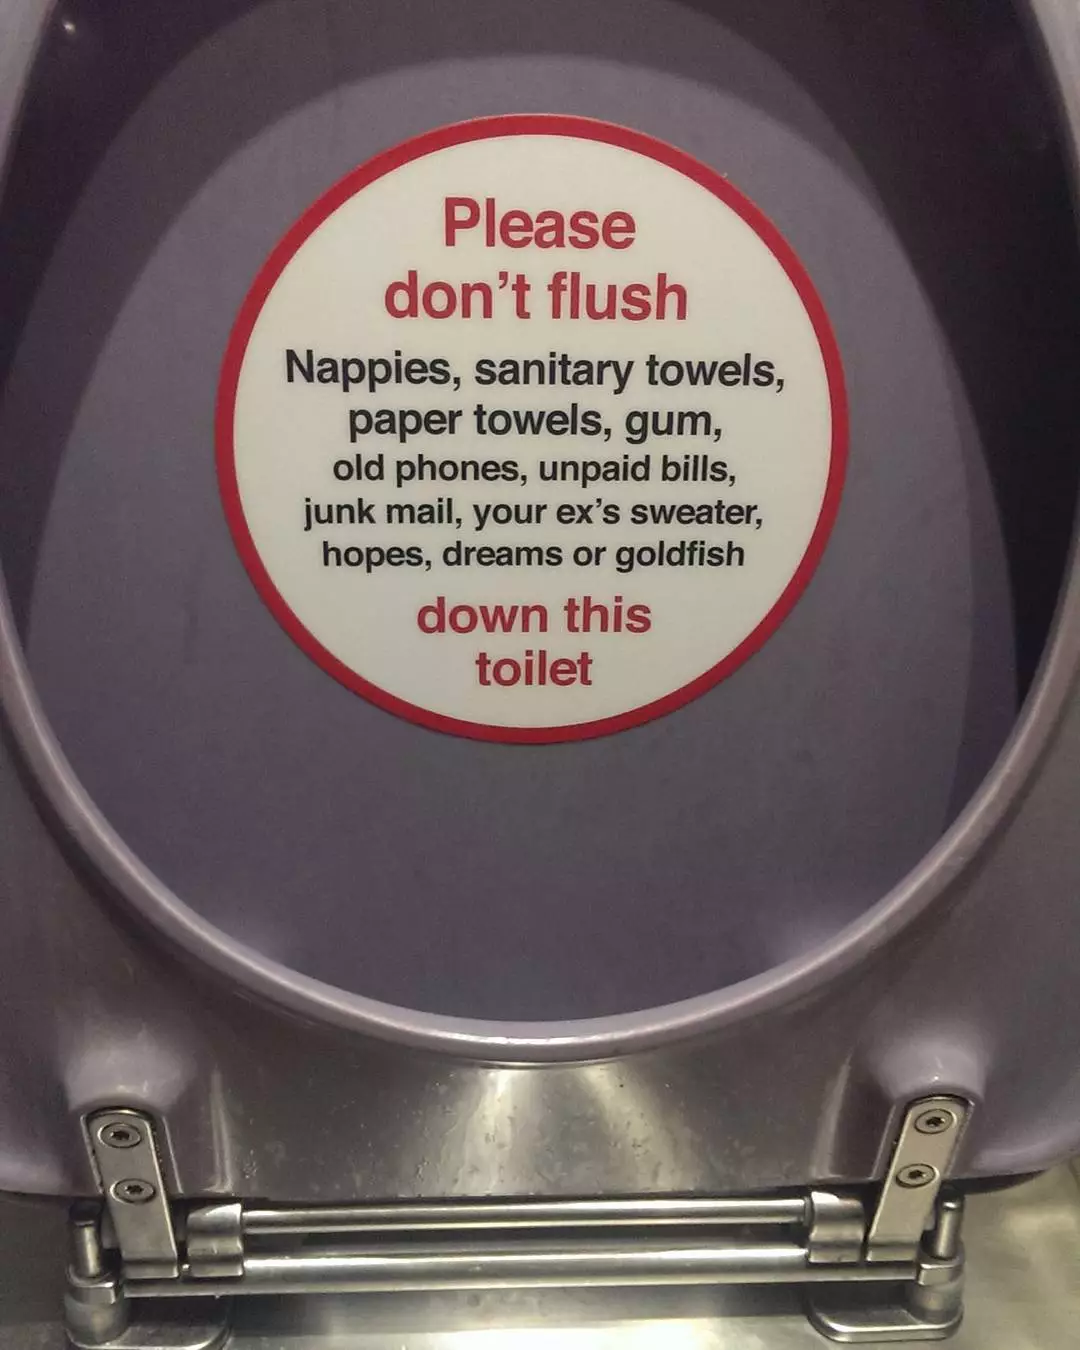 Ever Wondered What Happens To Toilet Waste On The Train?